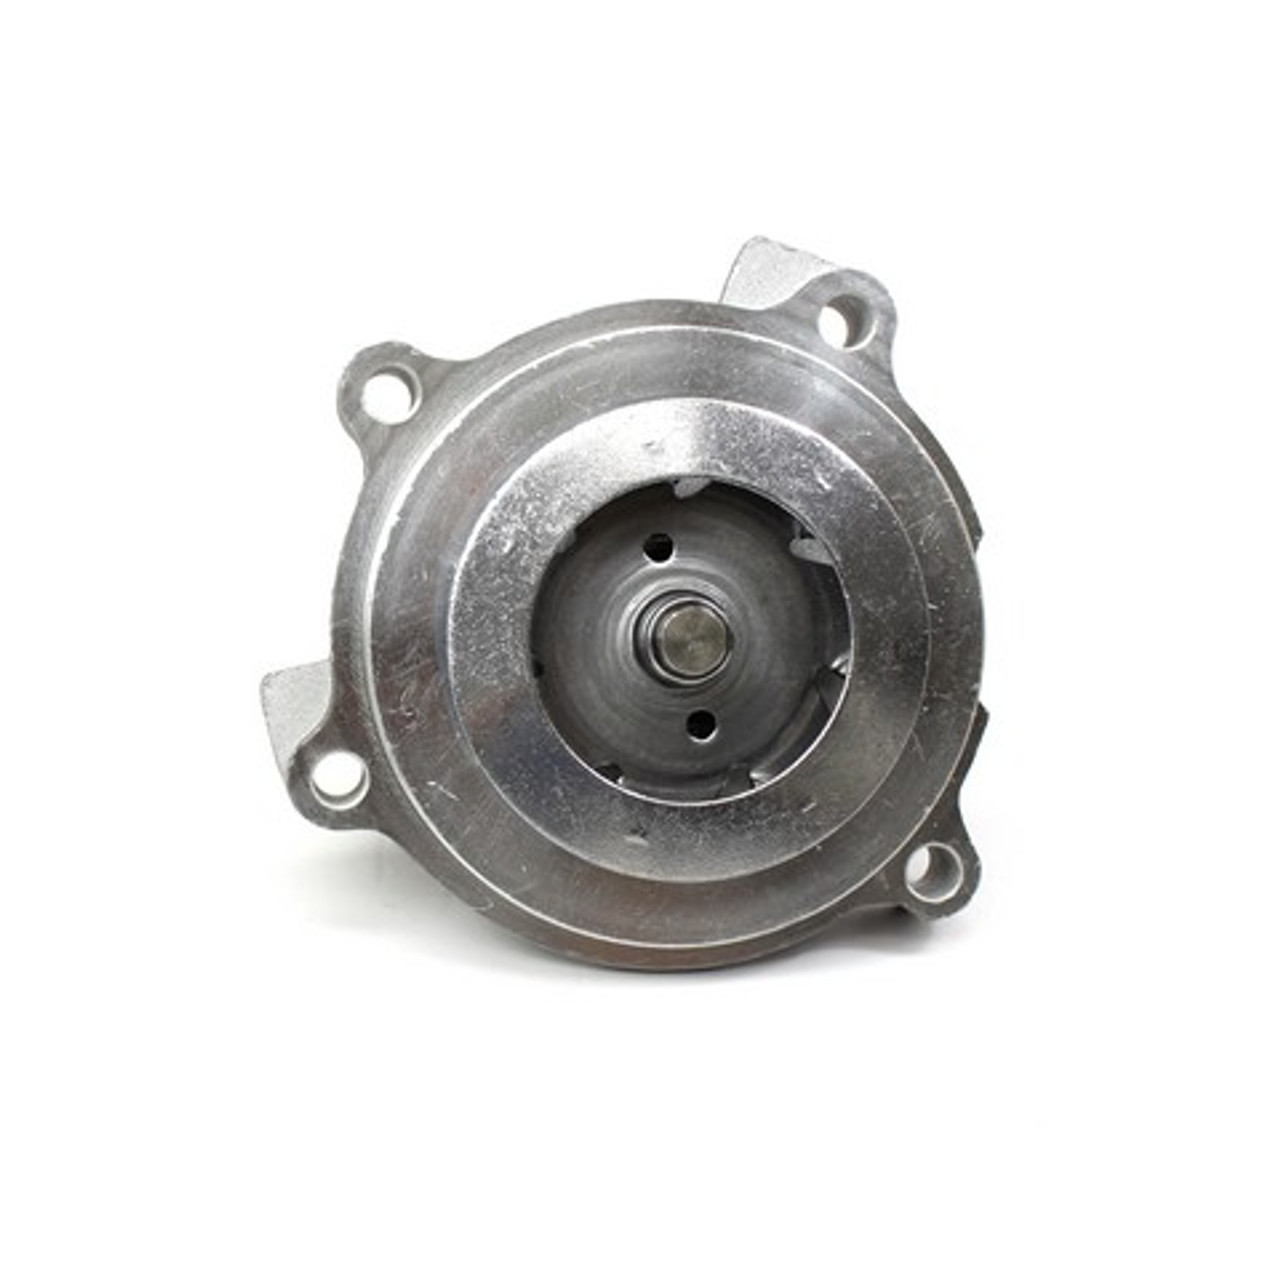 Water Pump 4.6L 2005 Ford Crown Victoria - WP4136.8